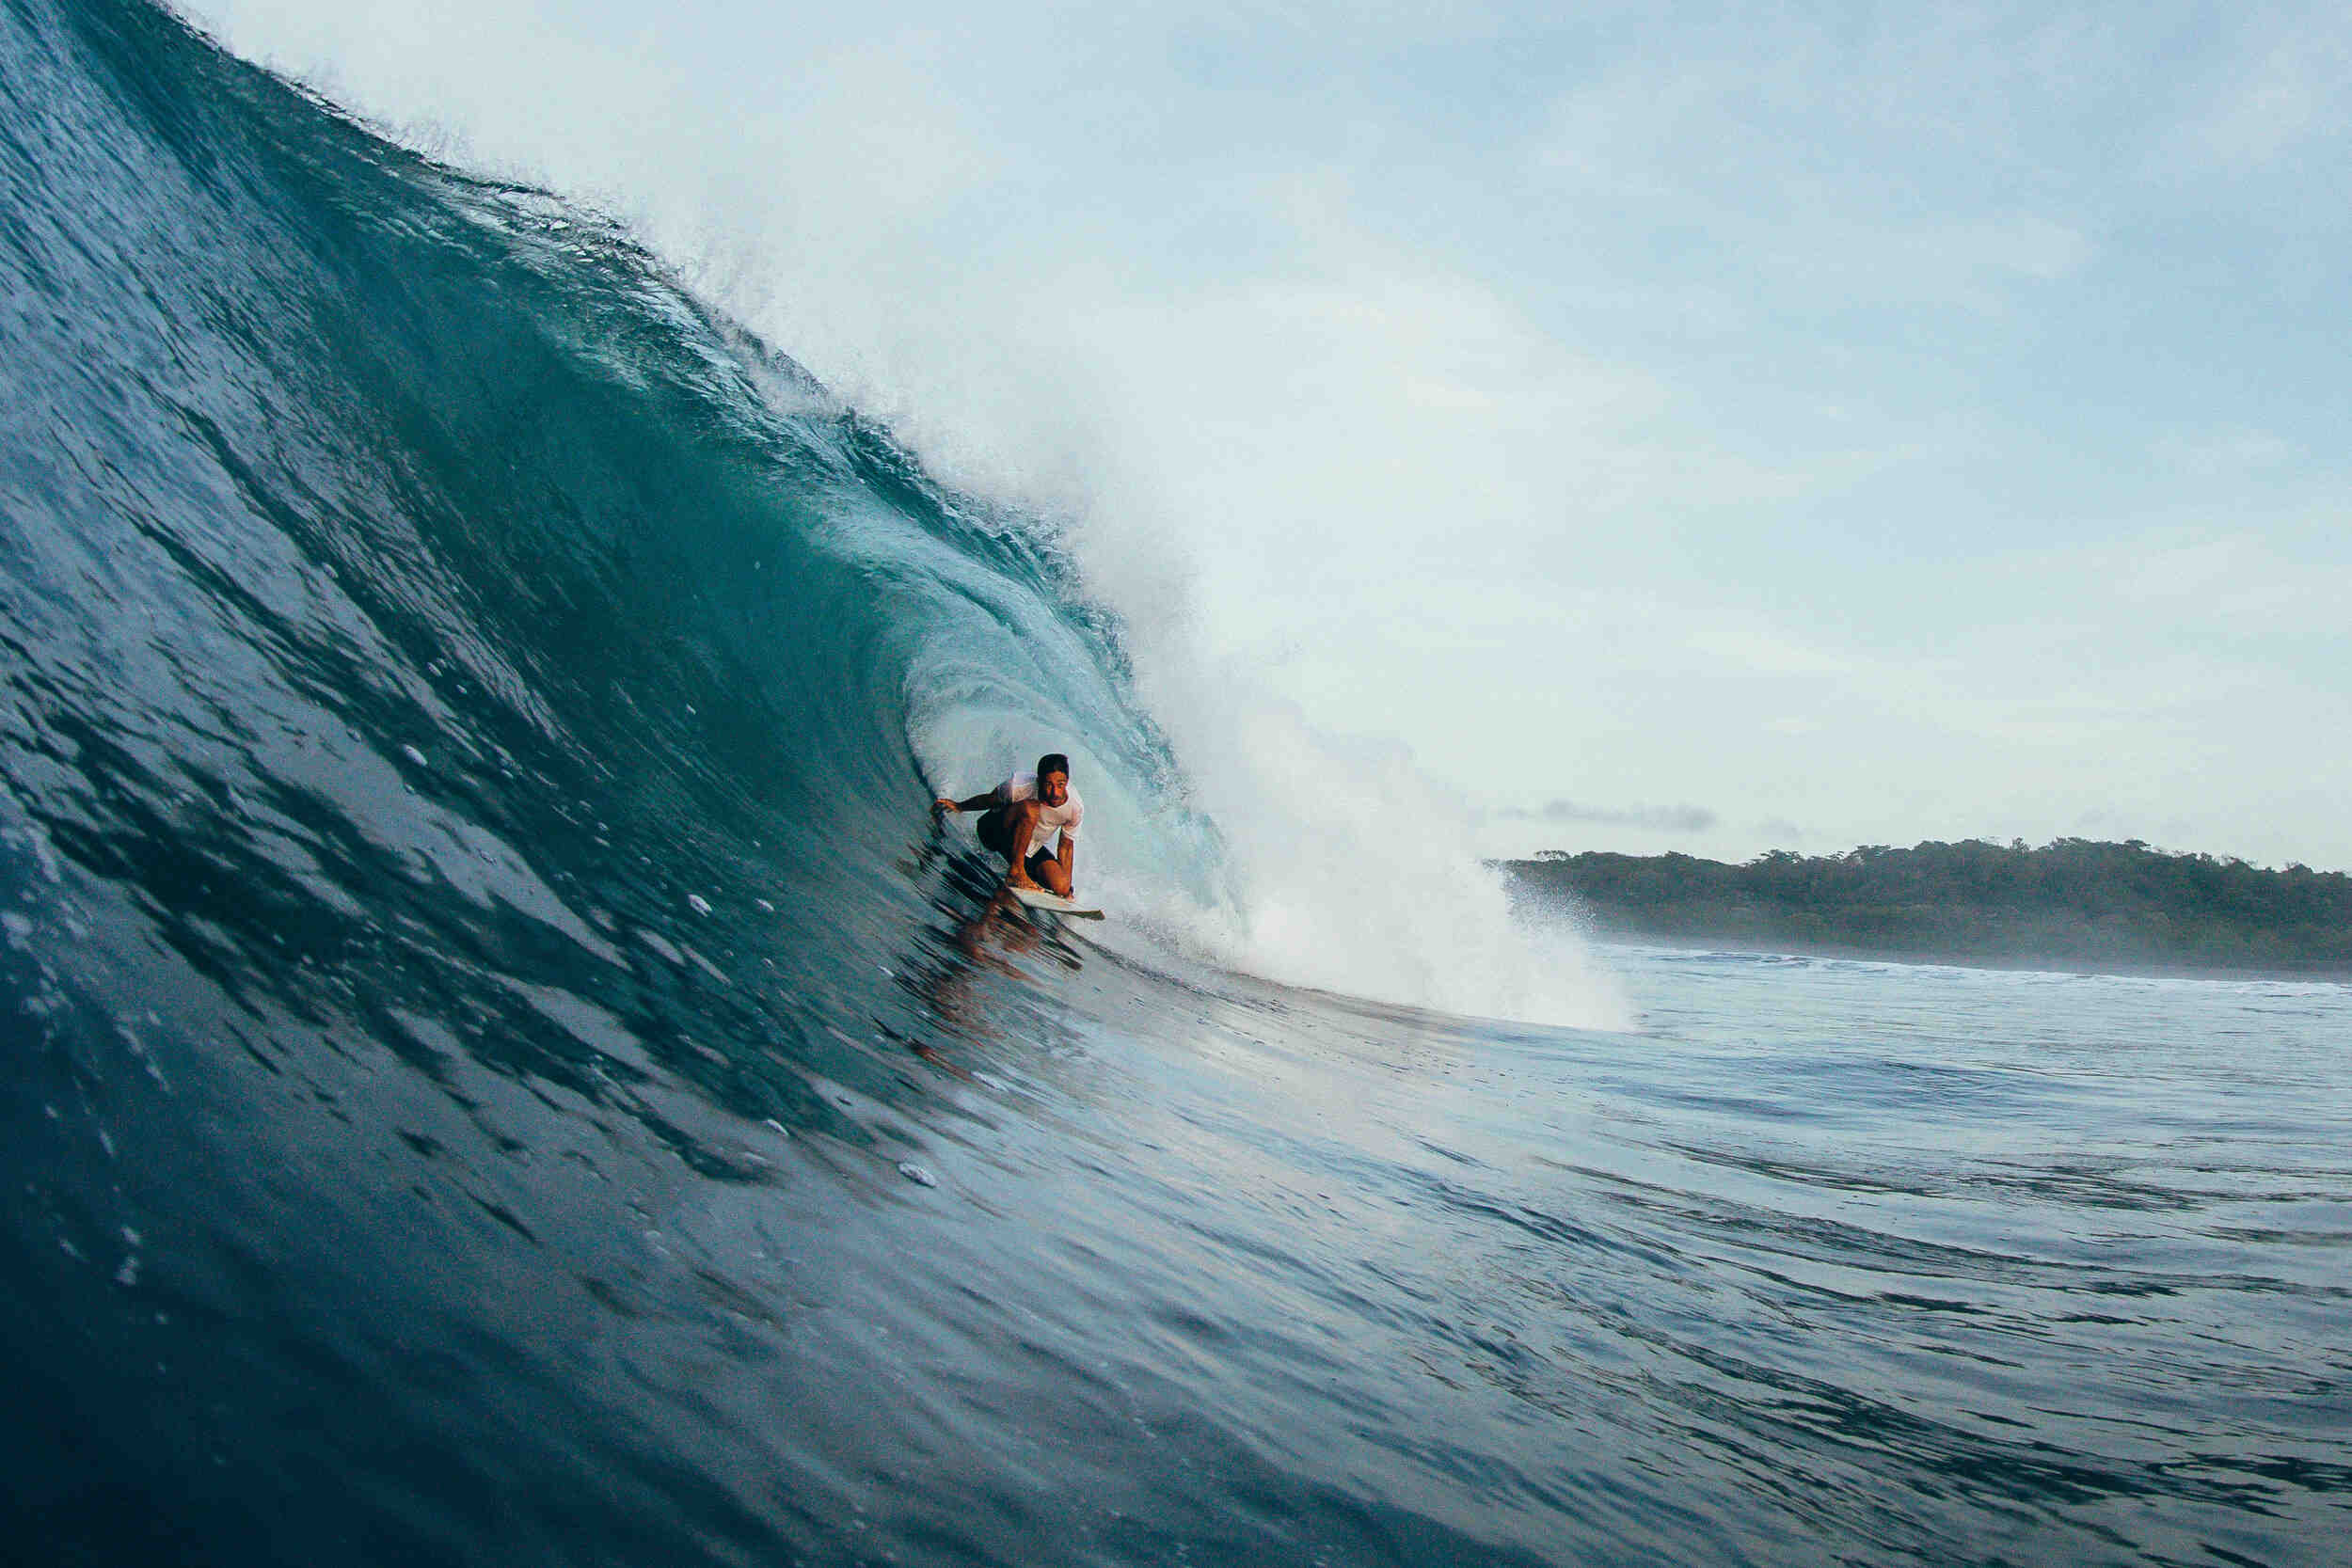 What strengths do you need for surfing?